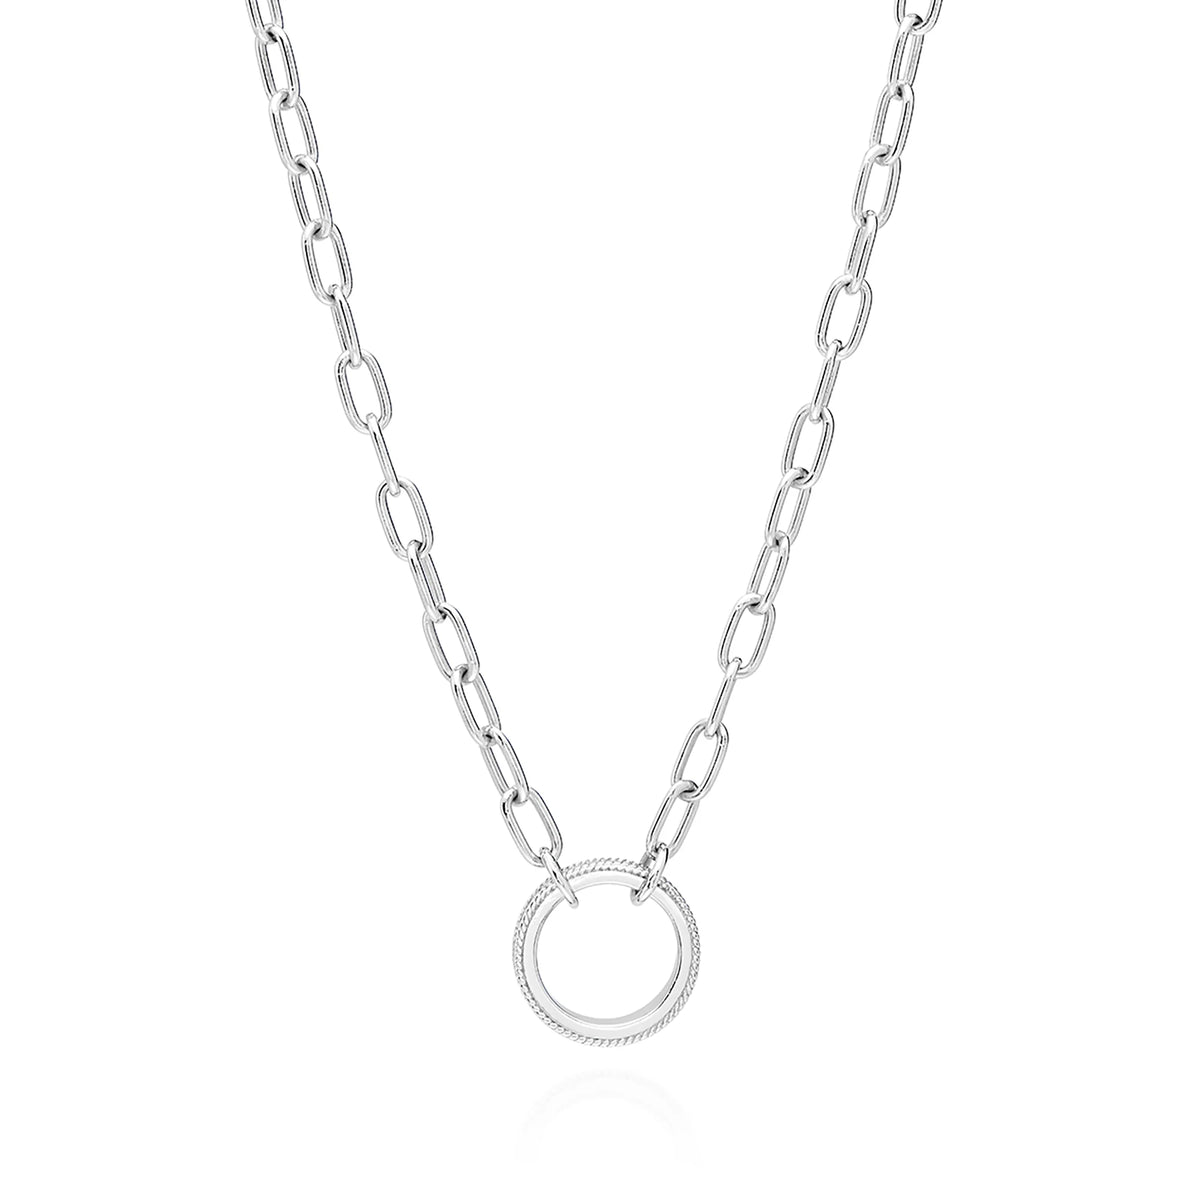 Silver link chain necklace with silver ring pendant with silver dotted details